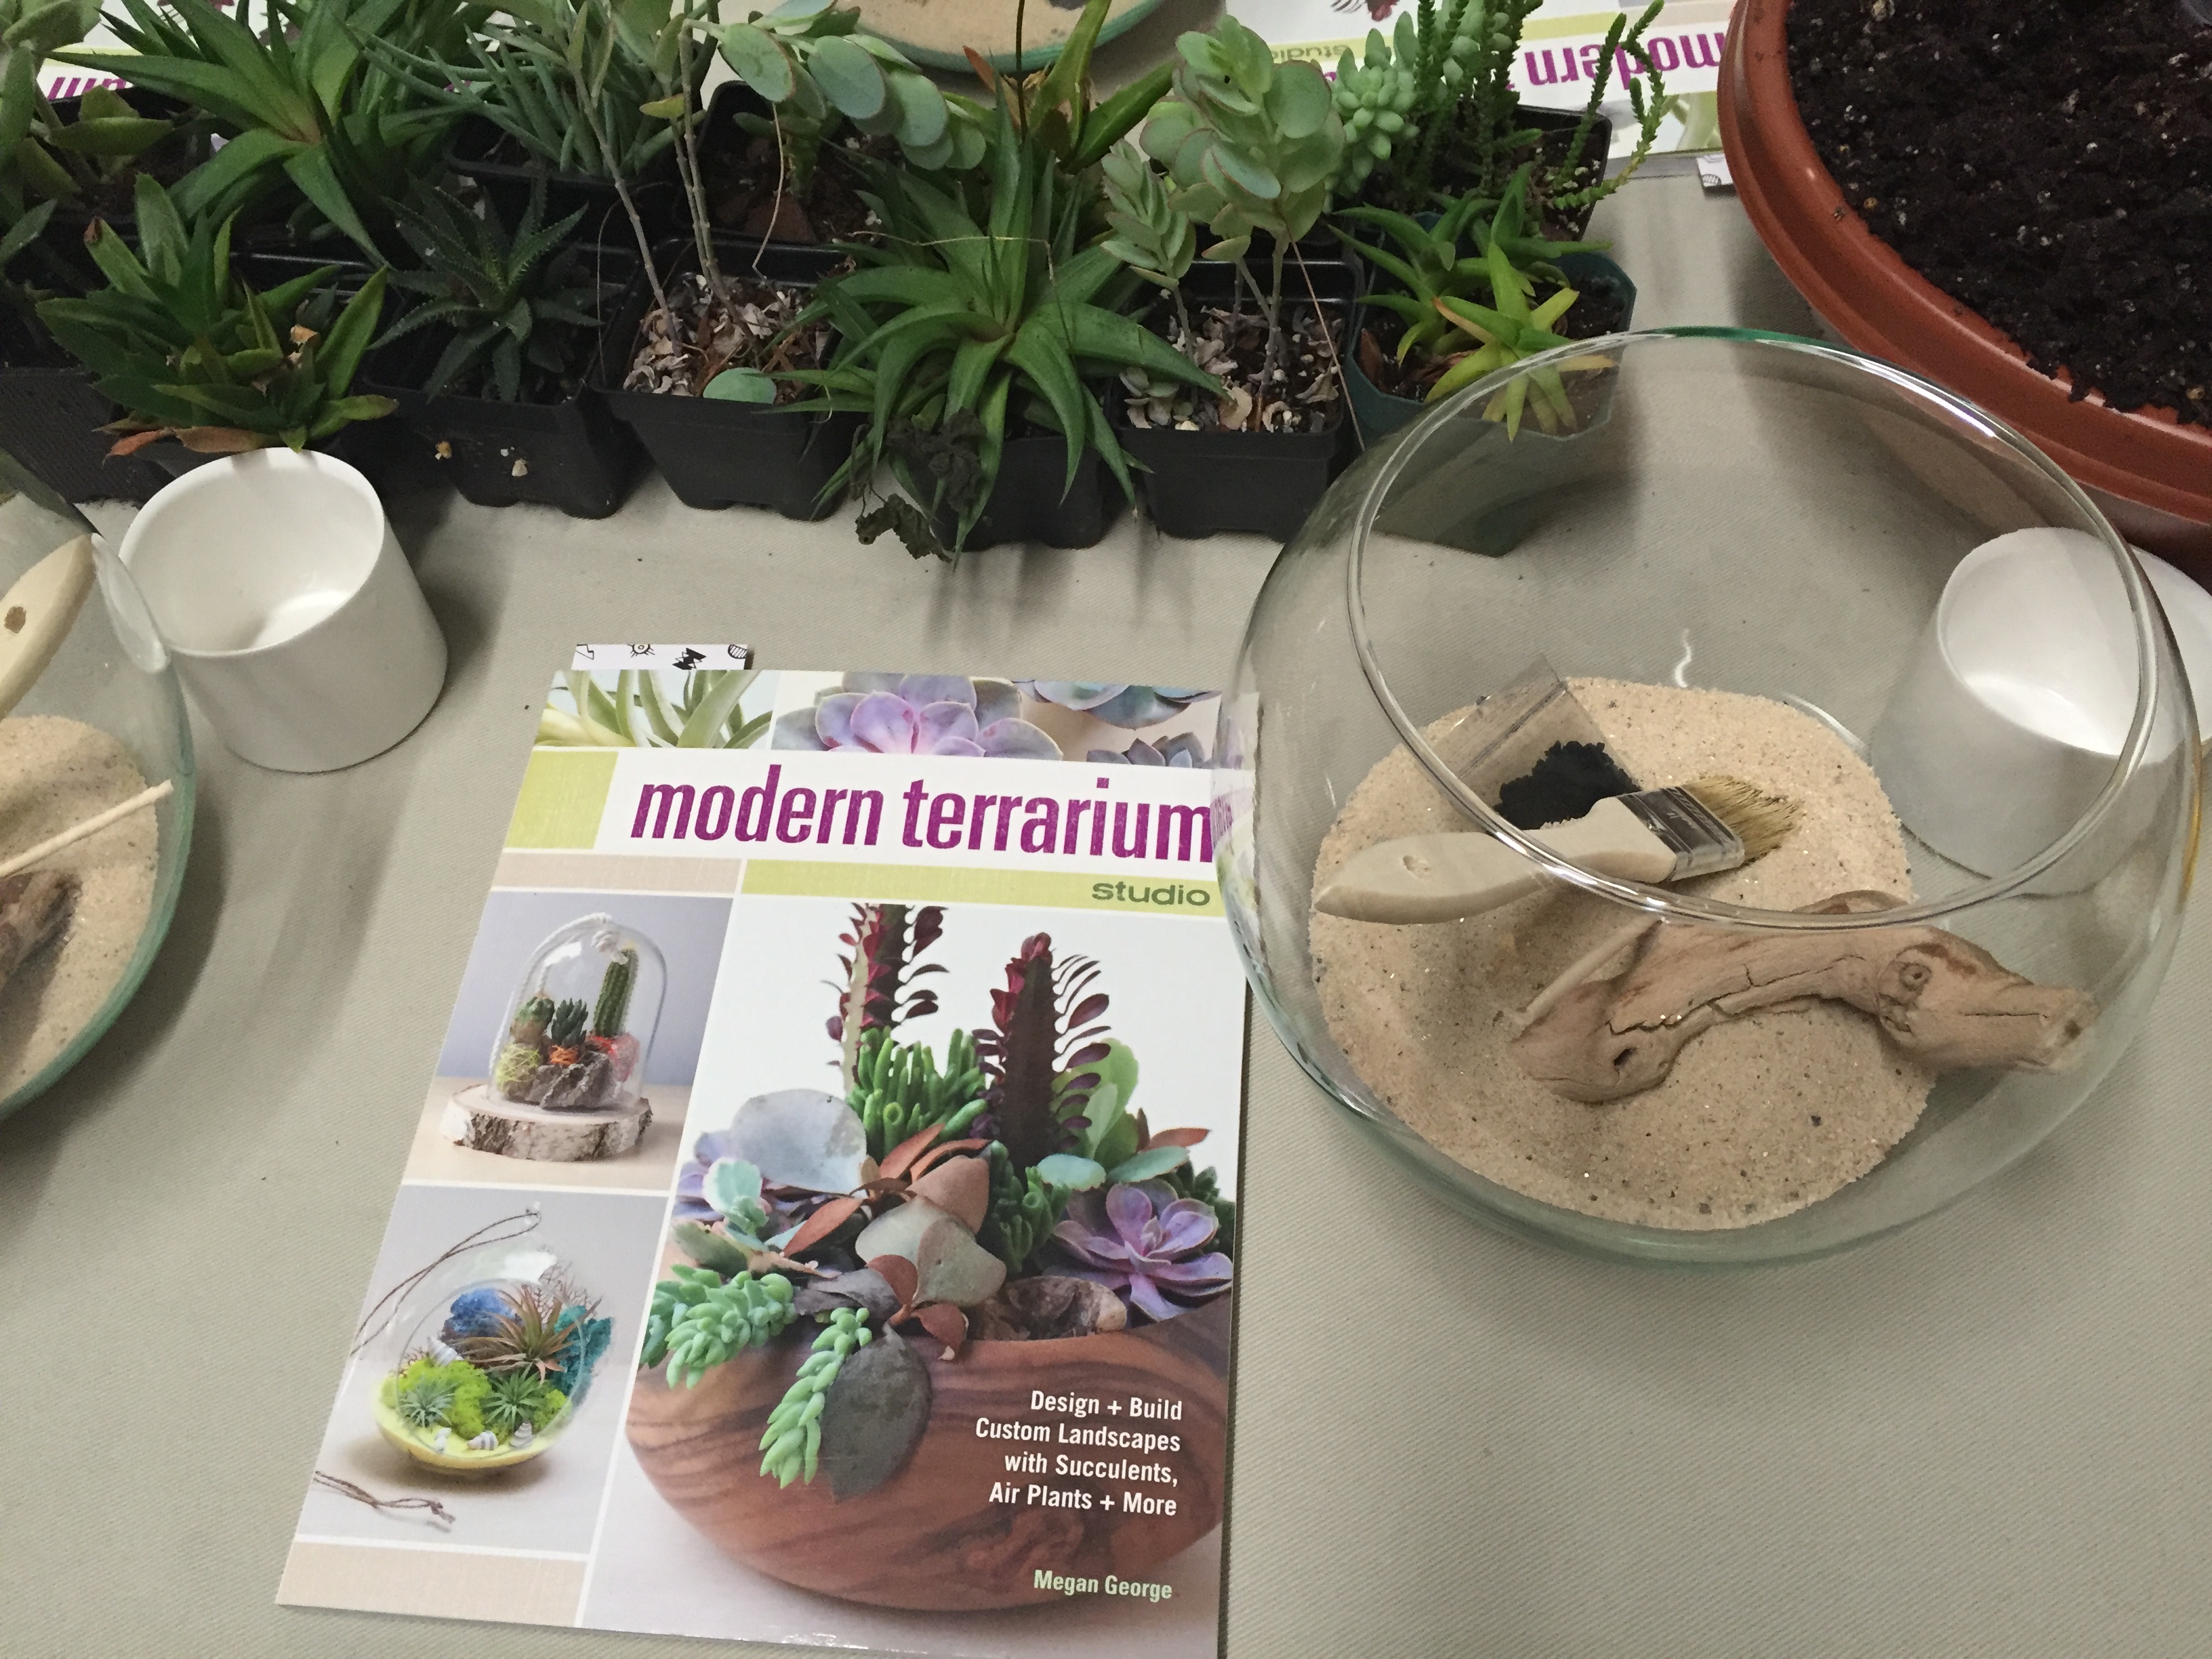 A copy of Megan George's book and terrarium supplies before starting the project